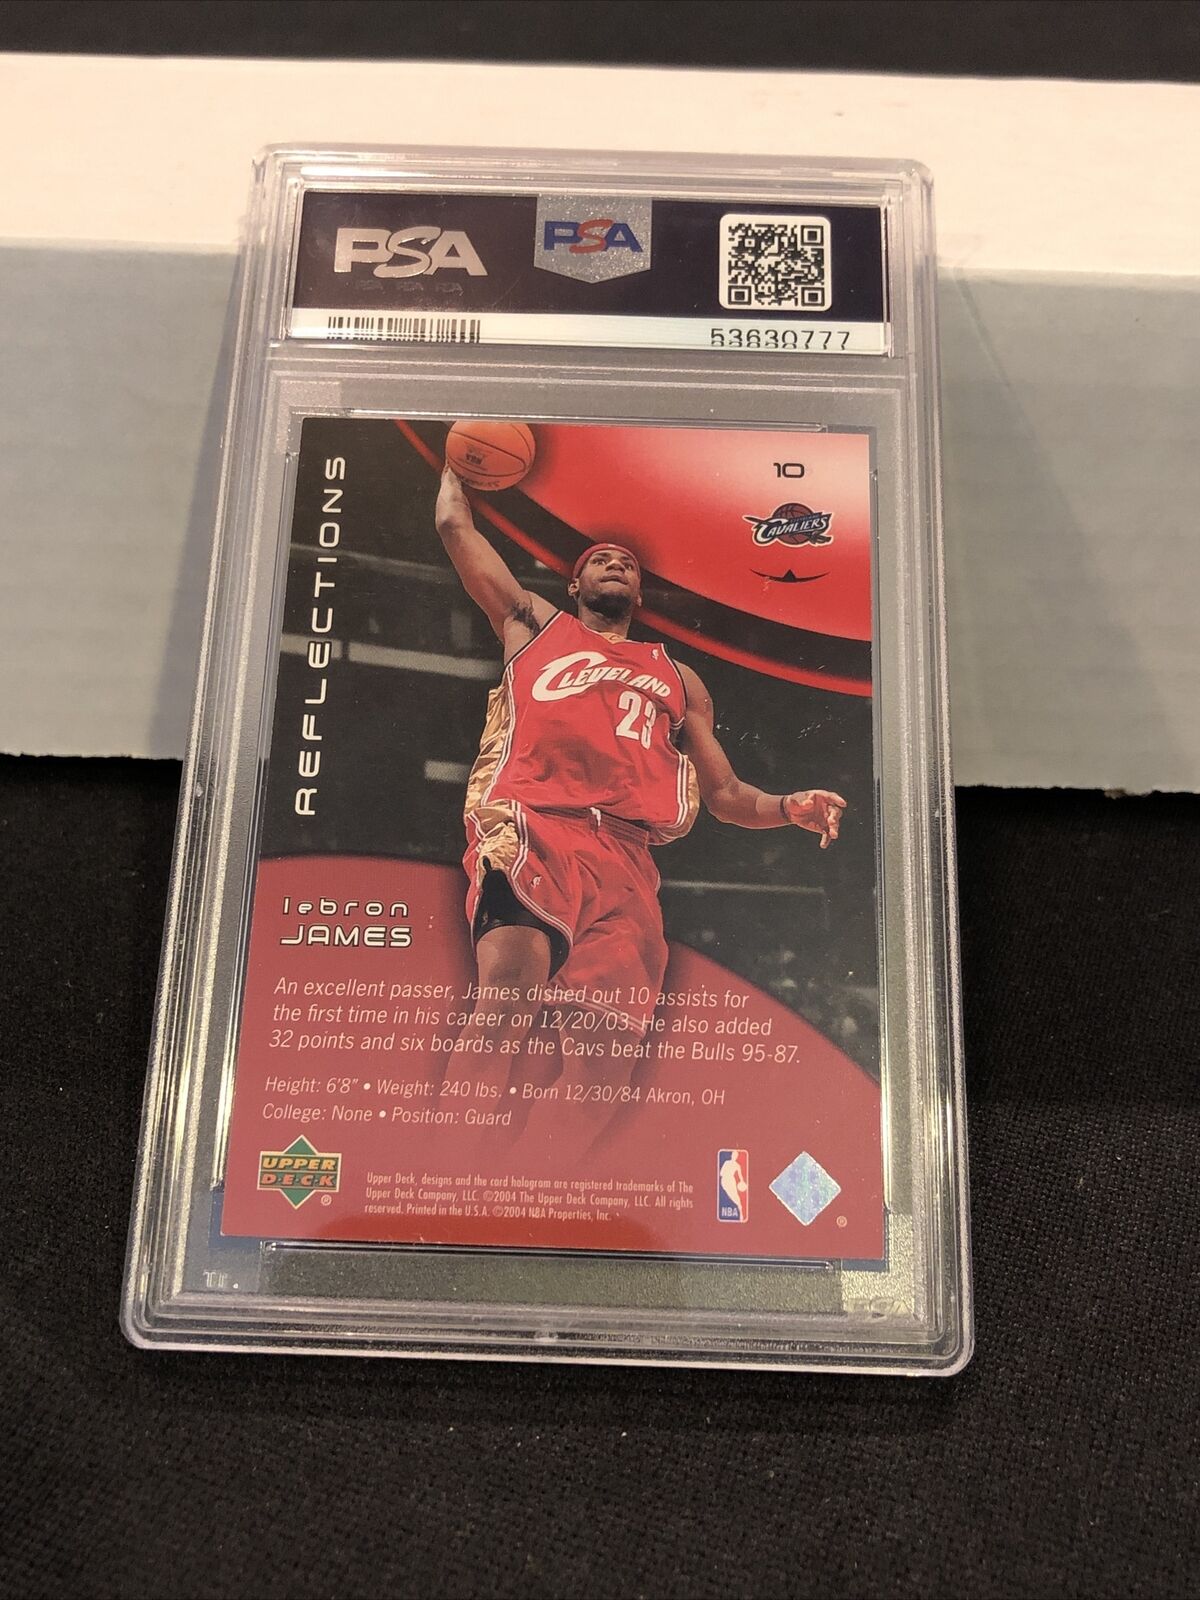 2003-04 UD Reflections LeBron James RC Rookie /500 Ruby Red PSA 